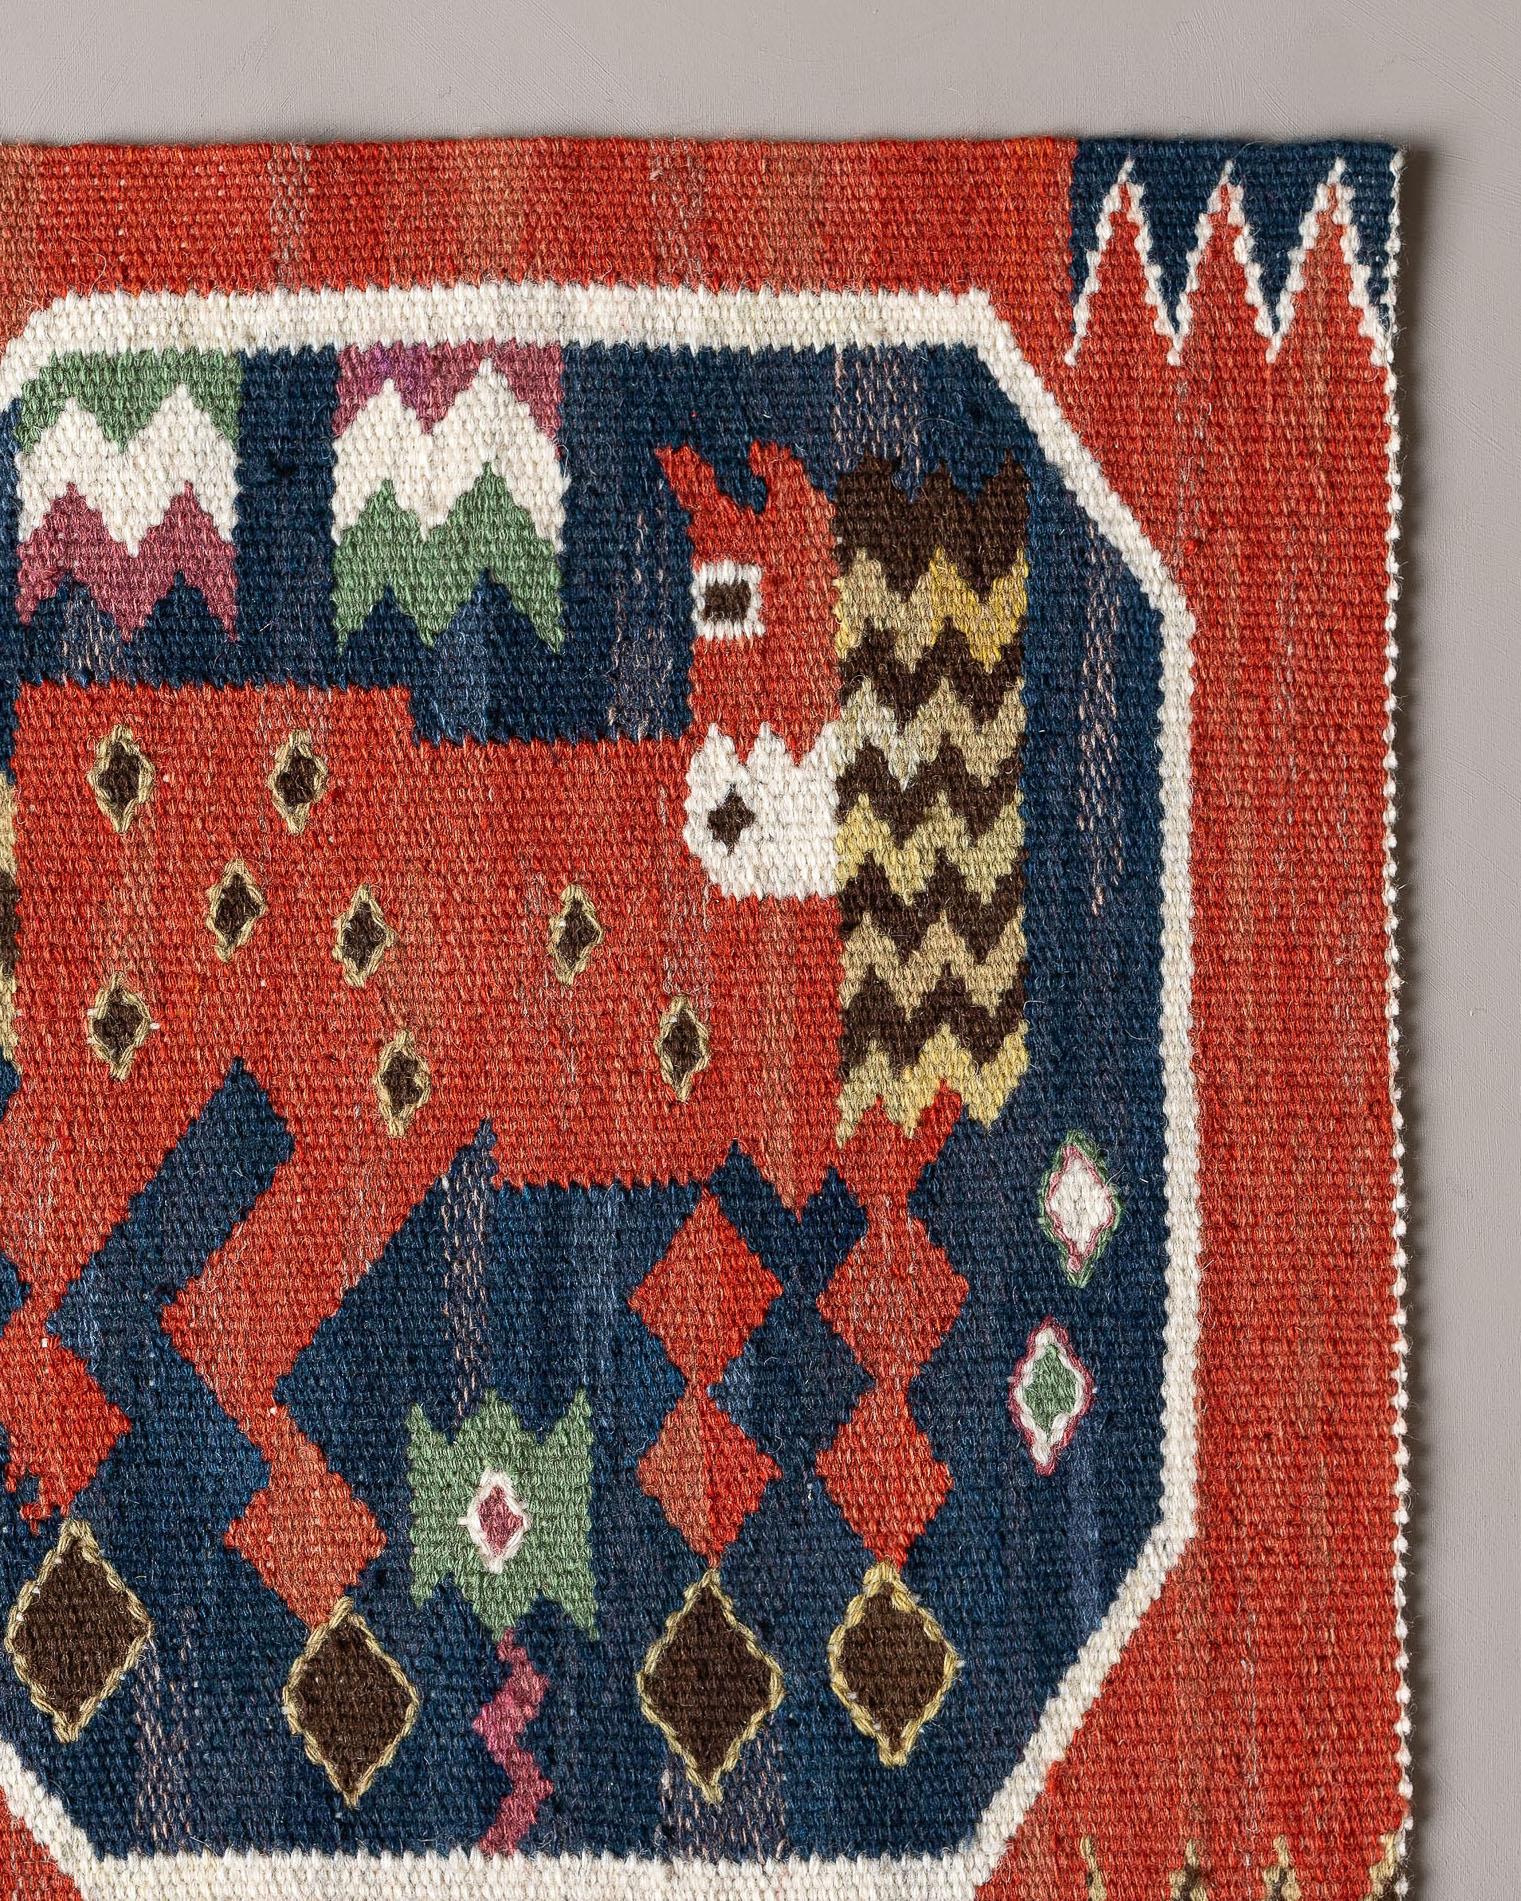 Handwoven tapestry in wool with motif of a red horse, looking back or maybe curious, designed by Märta Måås-Fjetterström in 1930. 

Several horses with different poses appears in the collection of red horses by MMF. They are details from the large